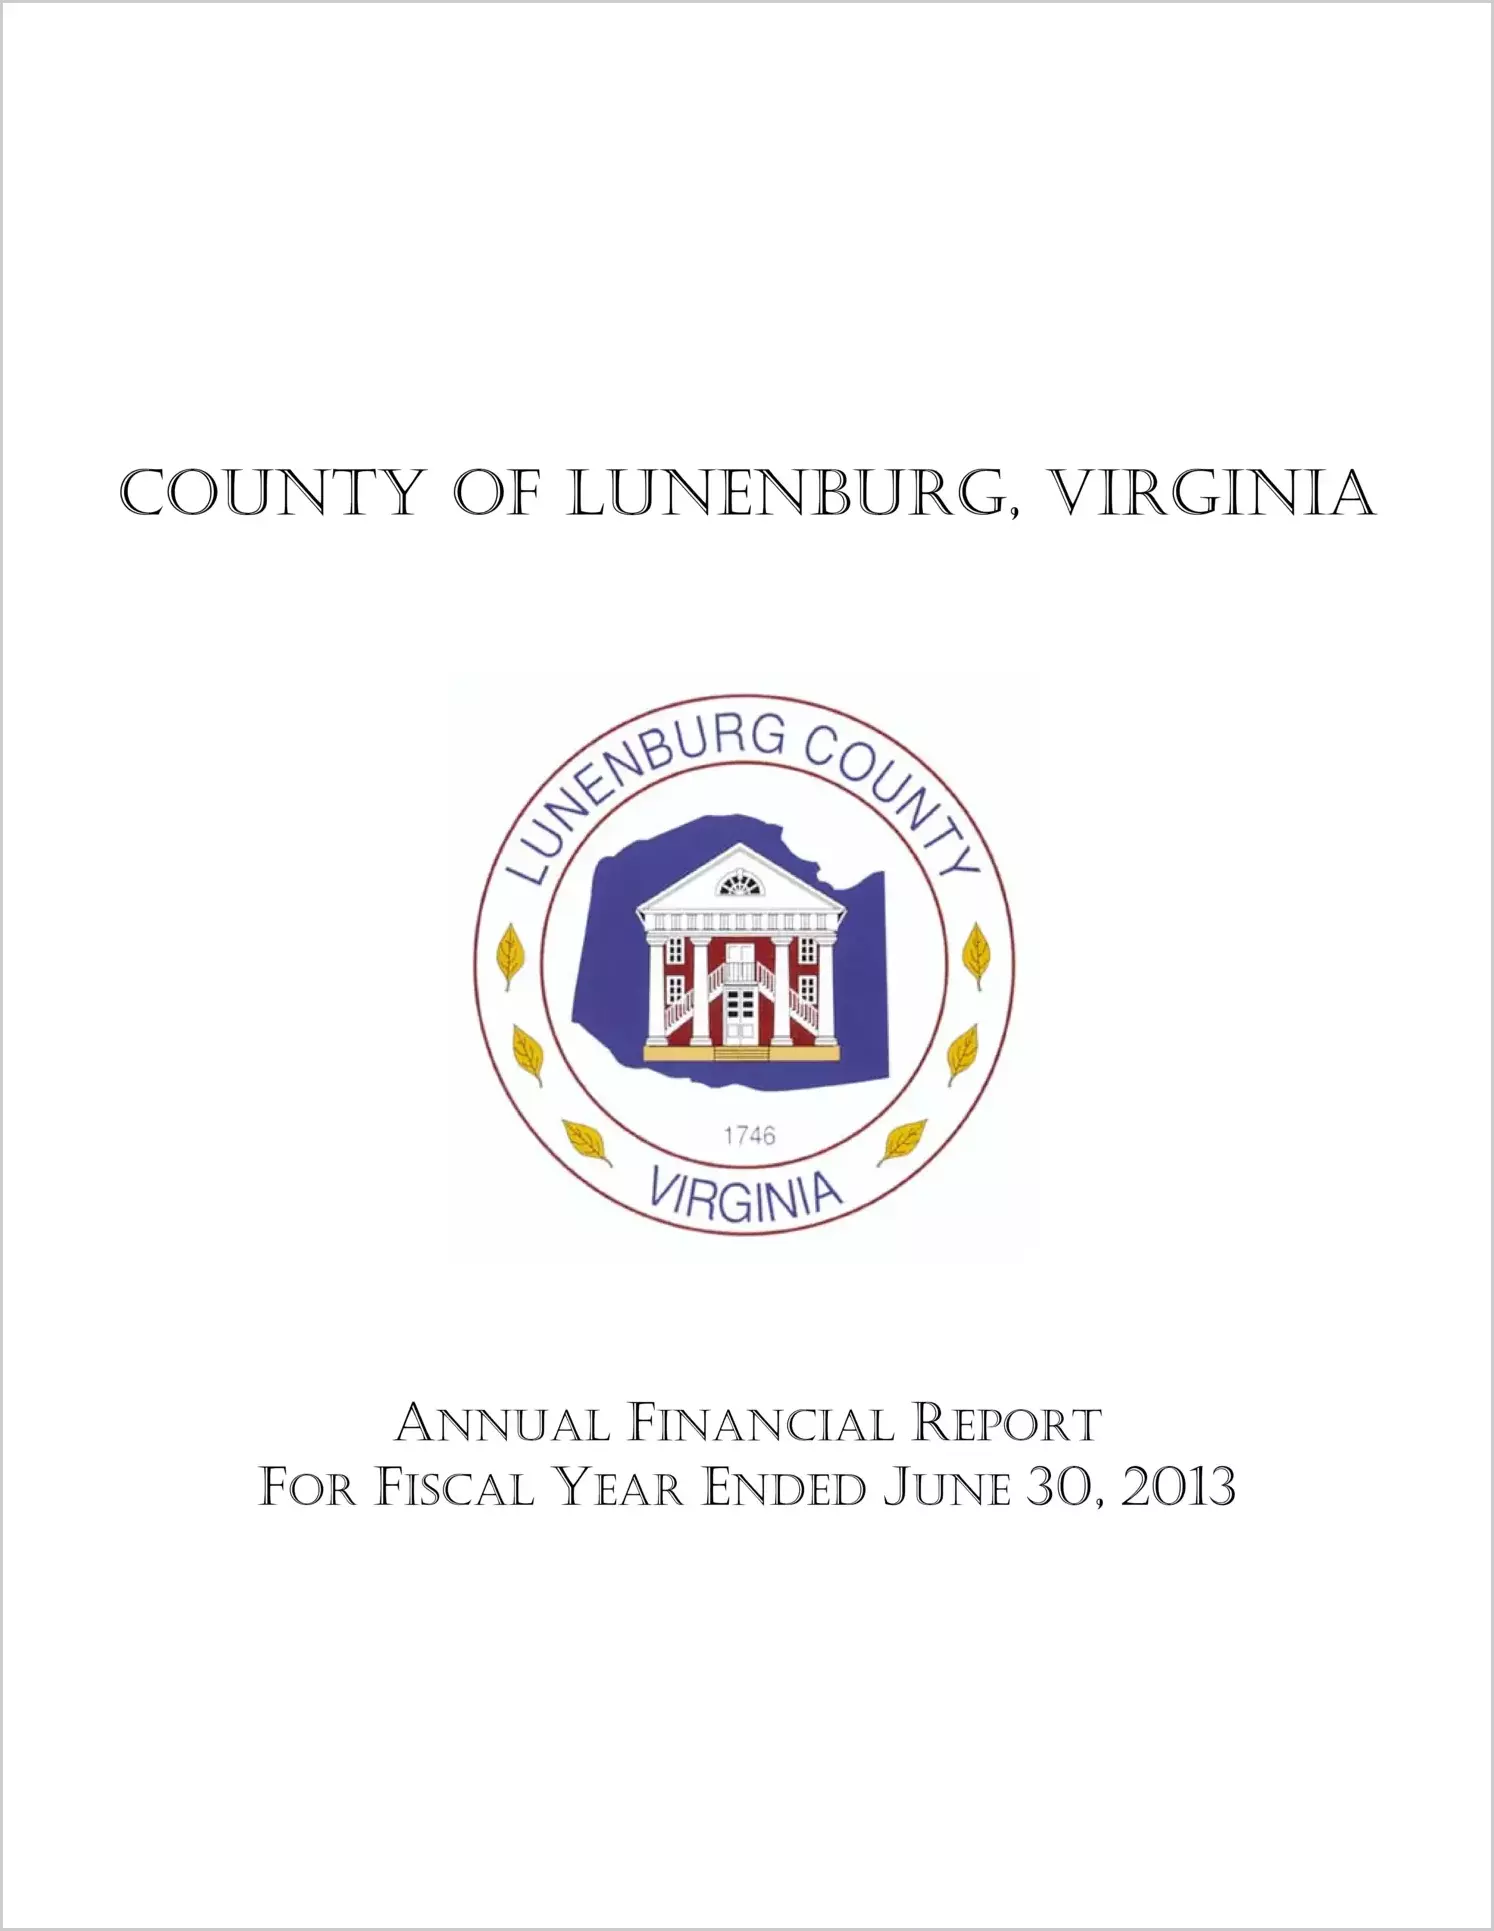 2013 Annual Financial Report for County of Lunenburg